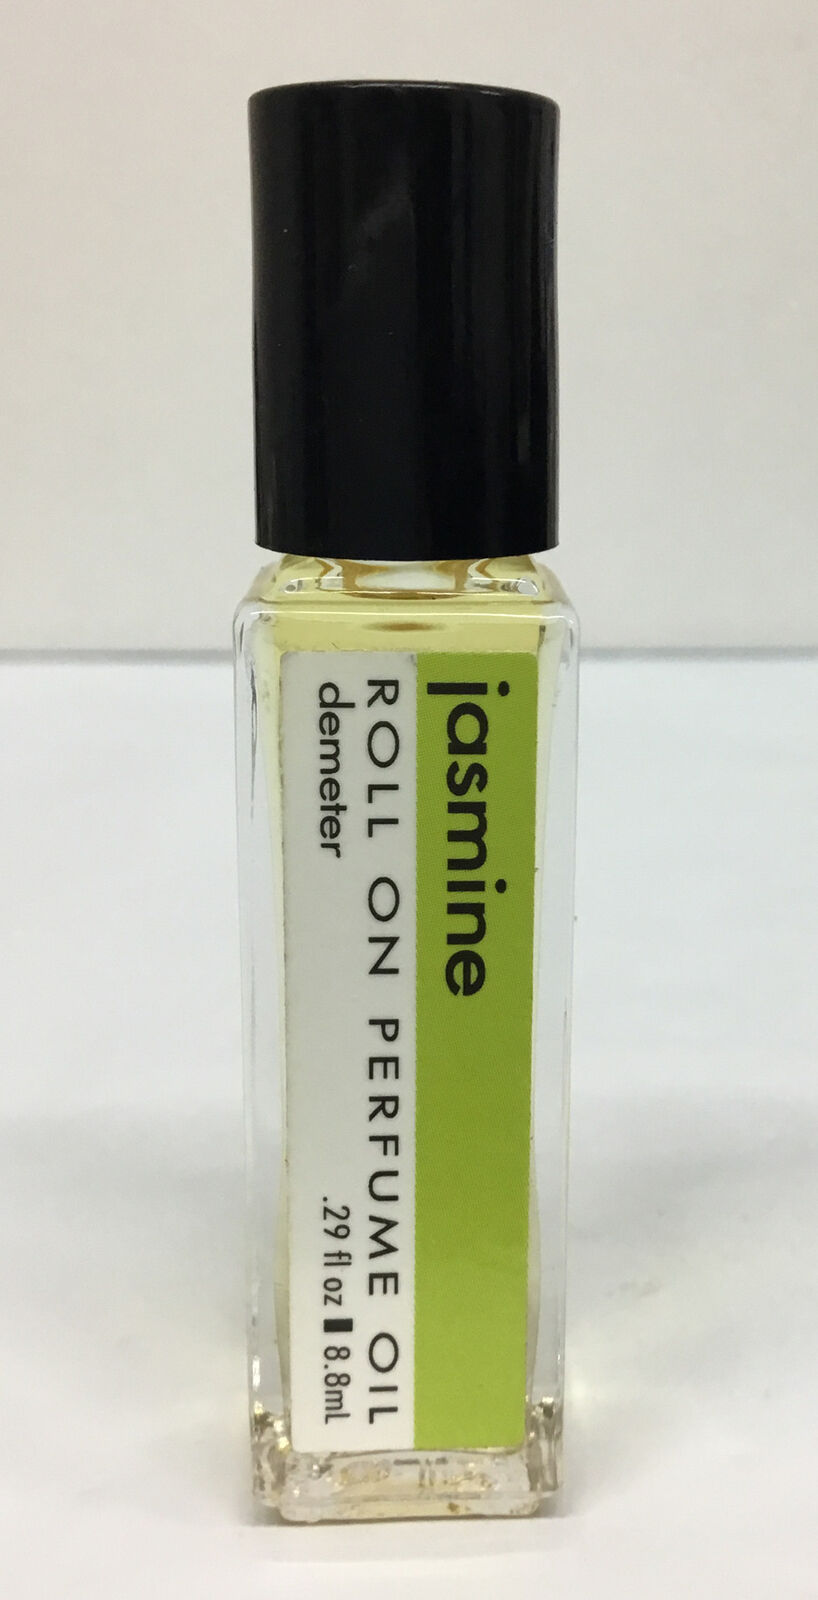 NEW Demeter Jasmine Roll On Perfume Oil 10ml Perfume CONDITION AS PICTURED